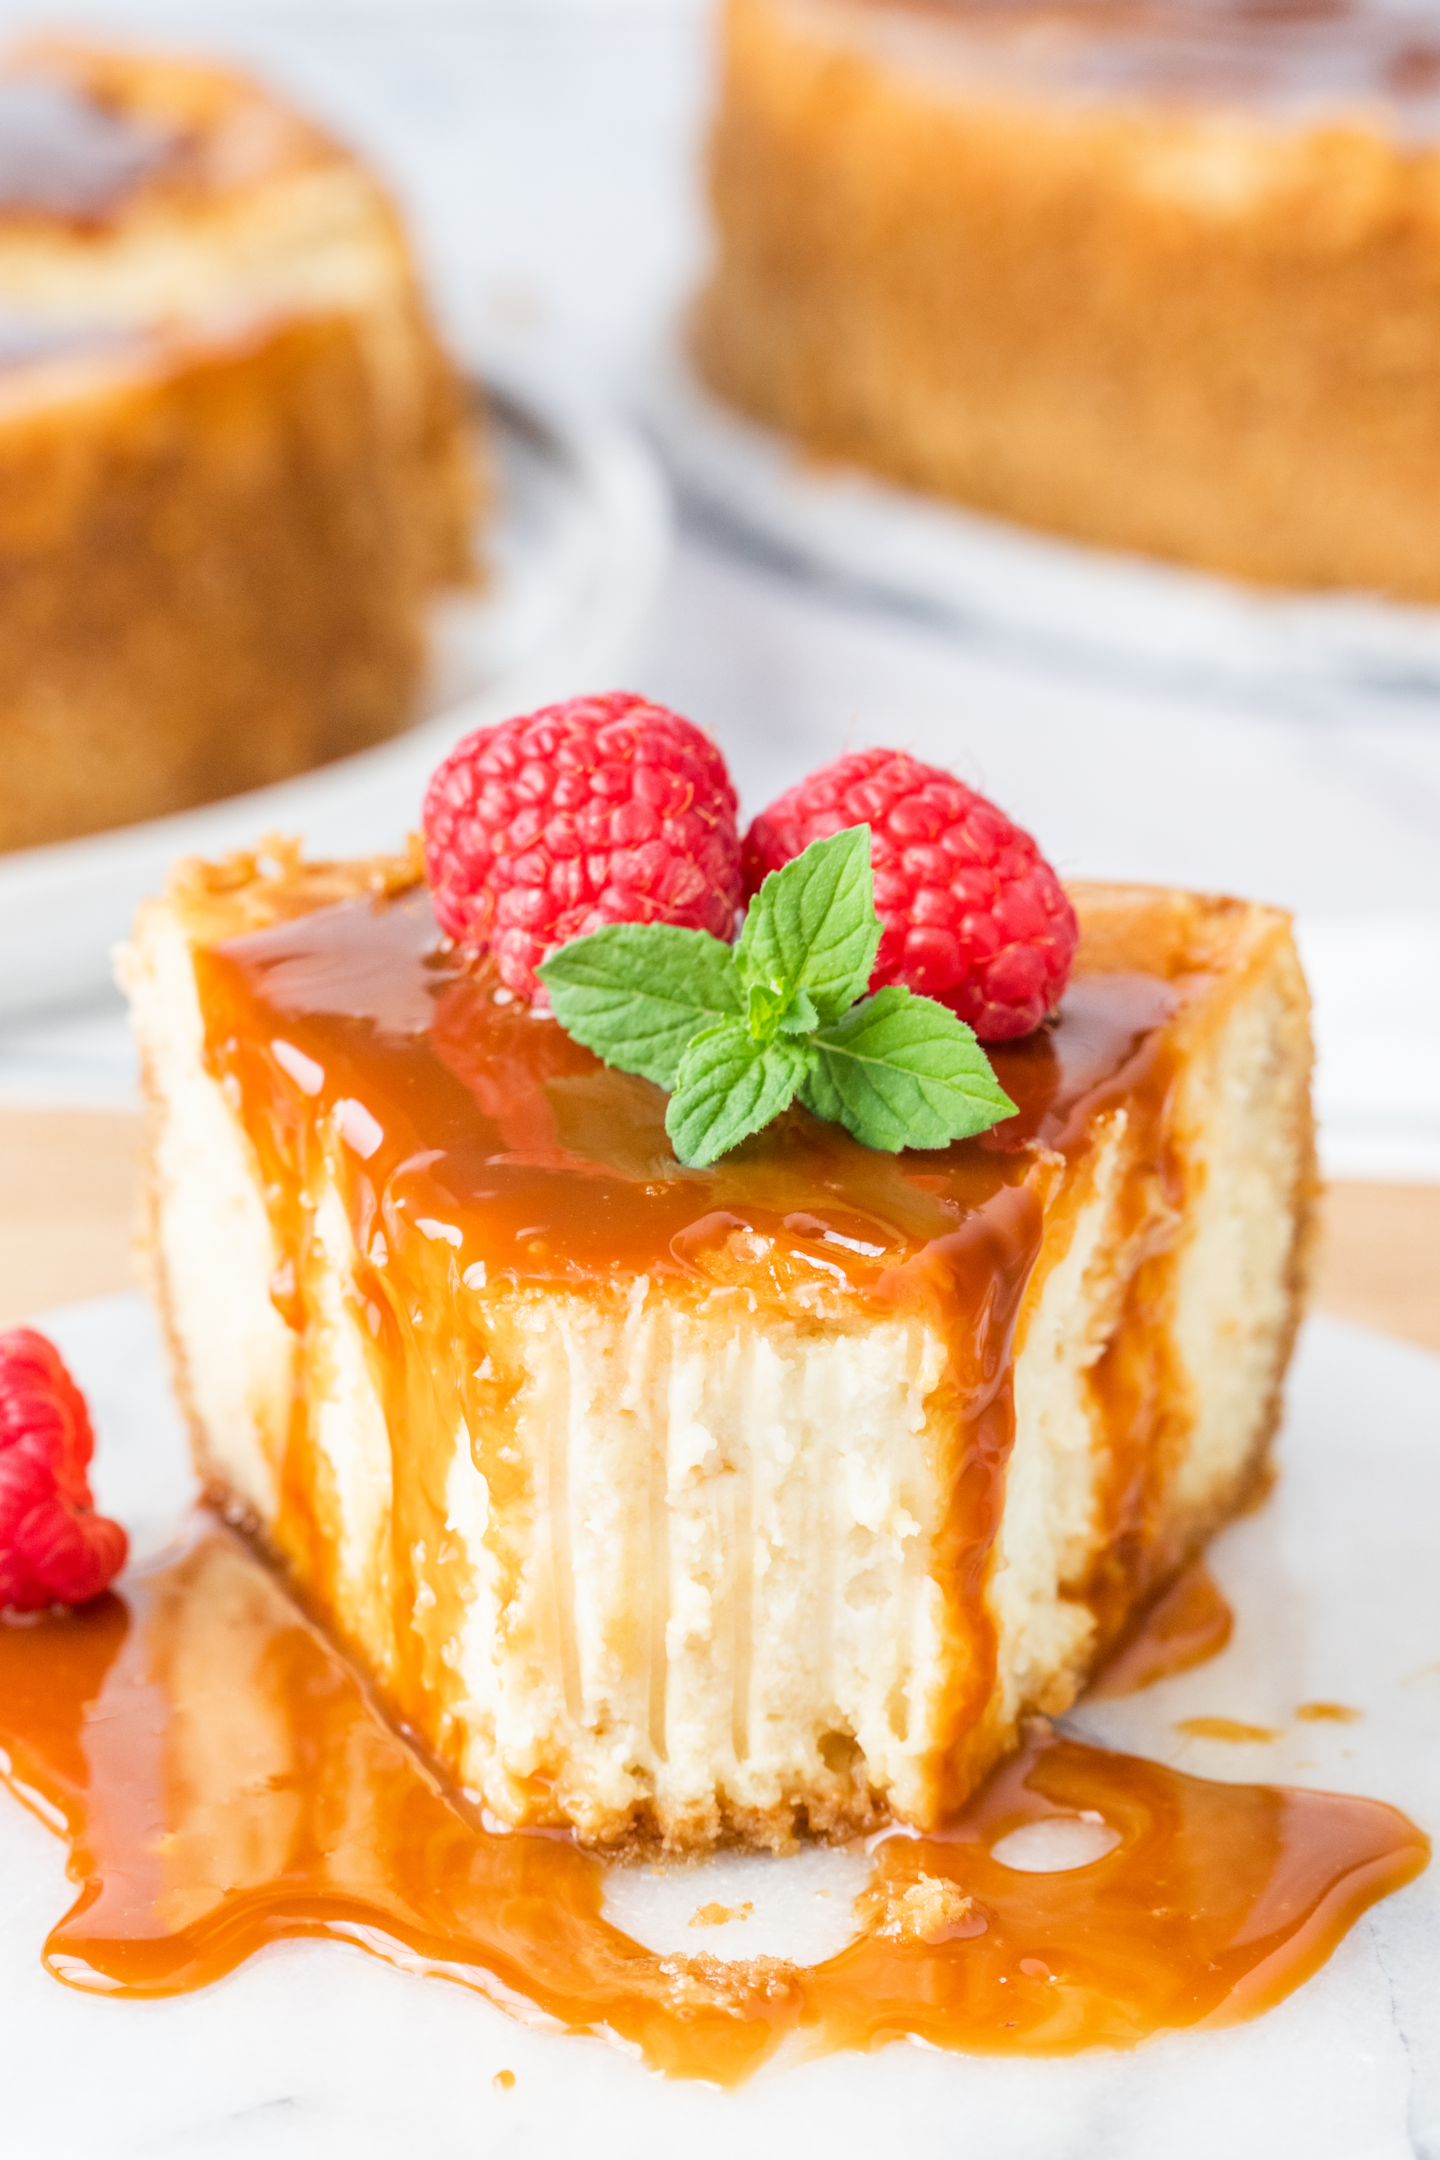 slice of caramel cheesecake topped with caramel sauce, and topped with fresh berries and mint